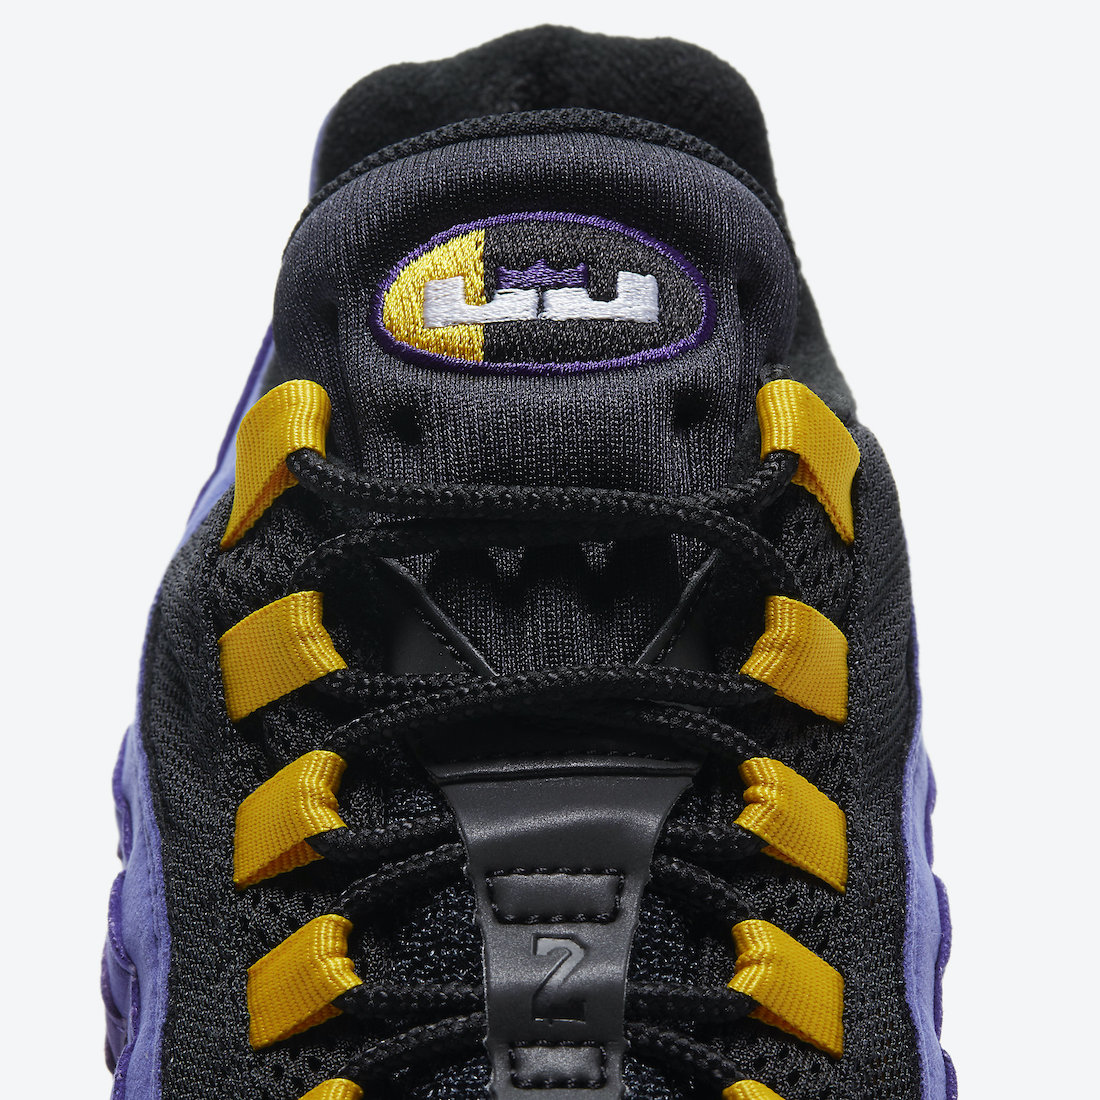 Nike-Air-Max-95-LeBron-Lakers-CZ3624-001-Release-Date-10